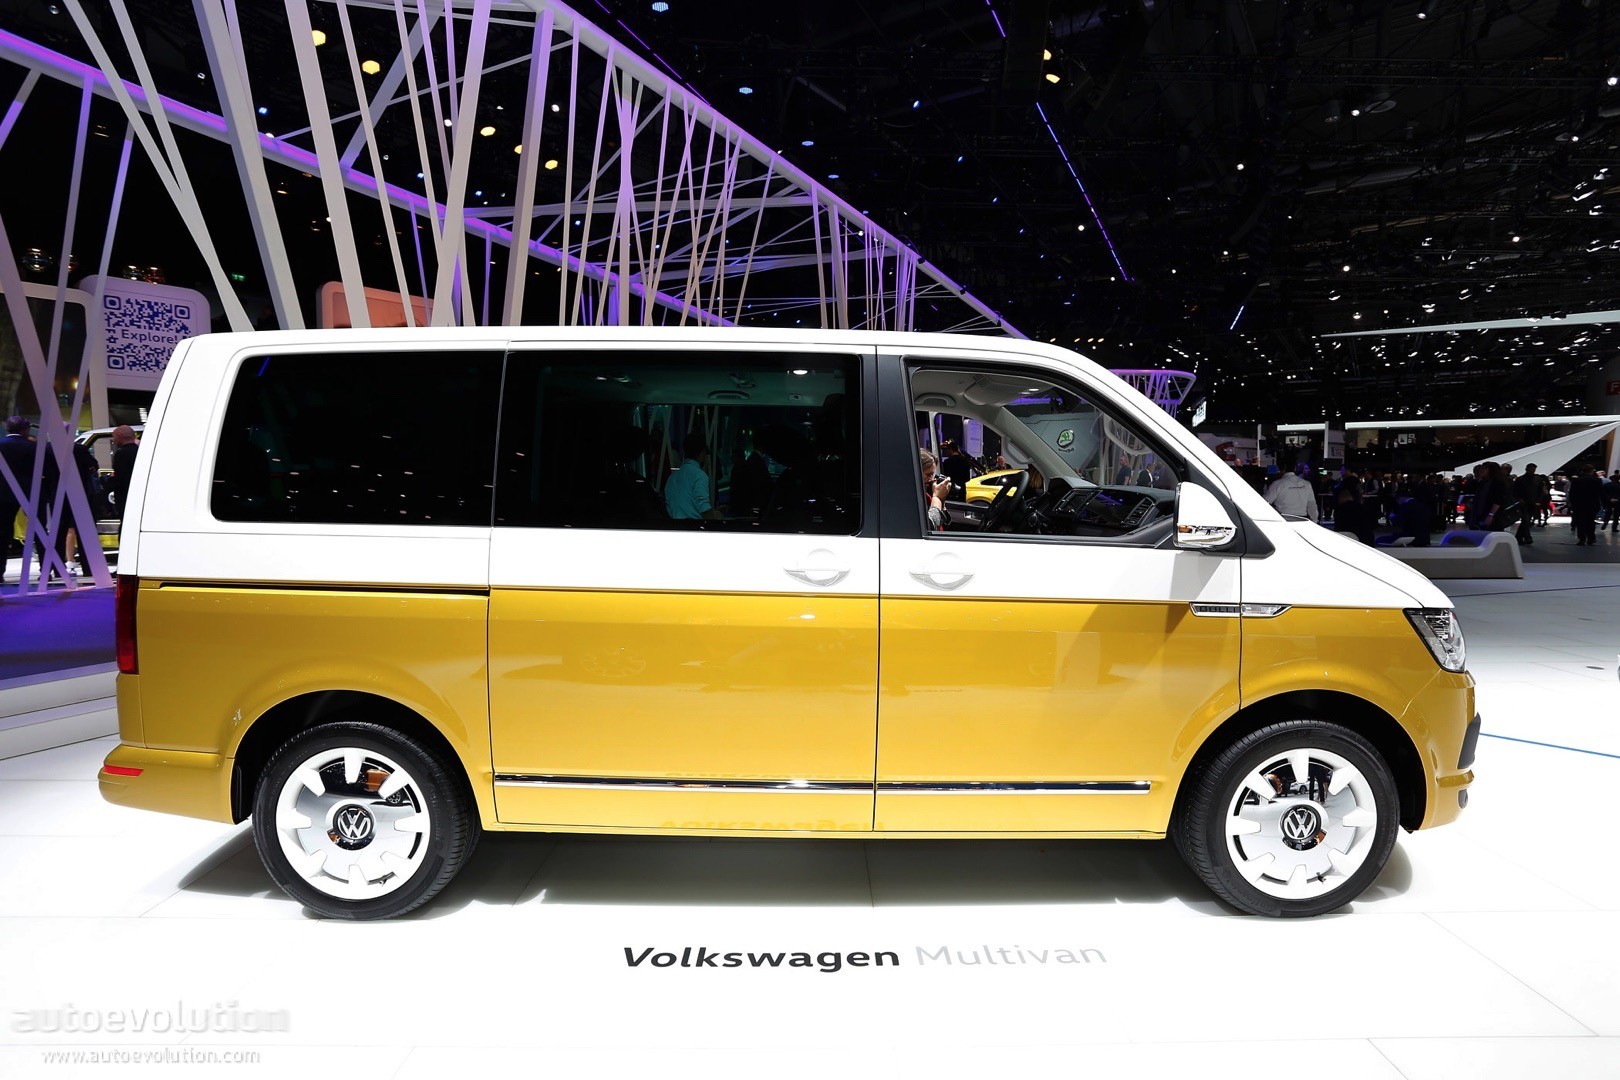 VW Multivan 70 Years Of The Bulli Special Edition Is The Coolest